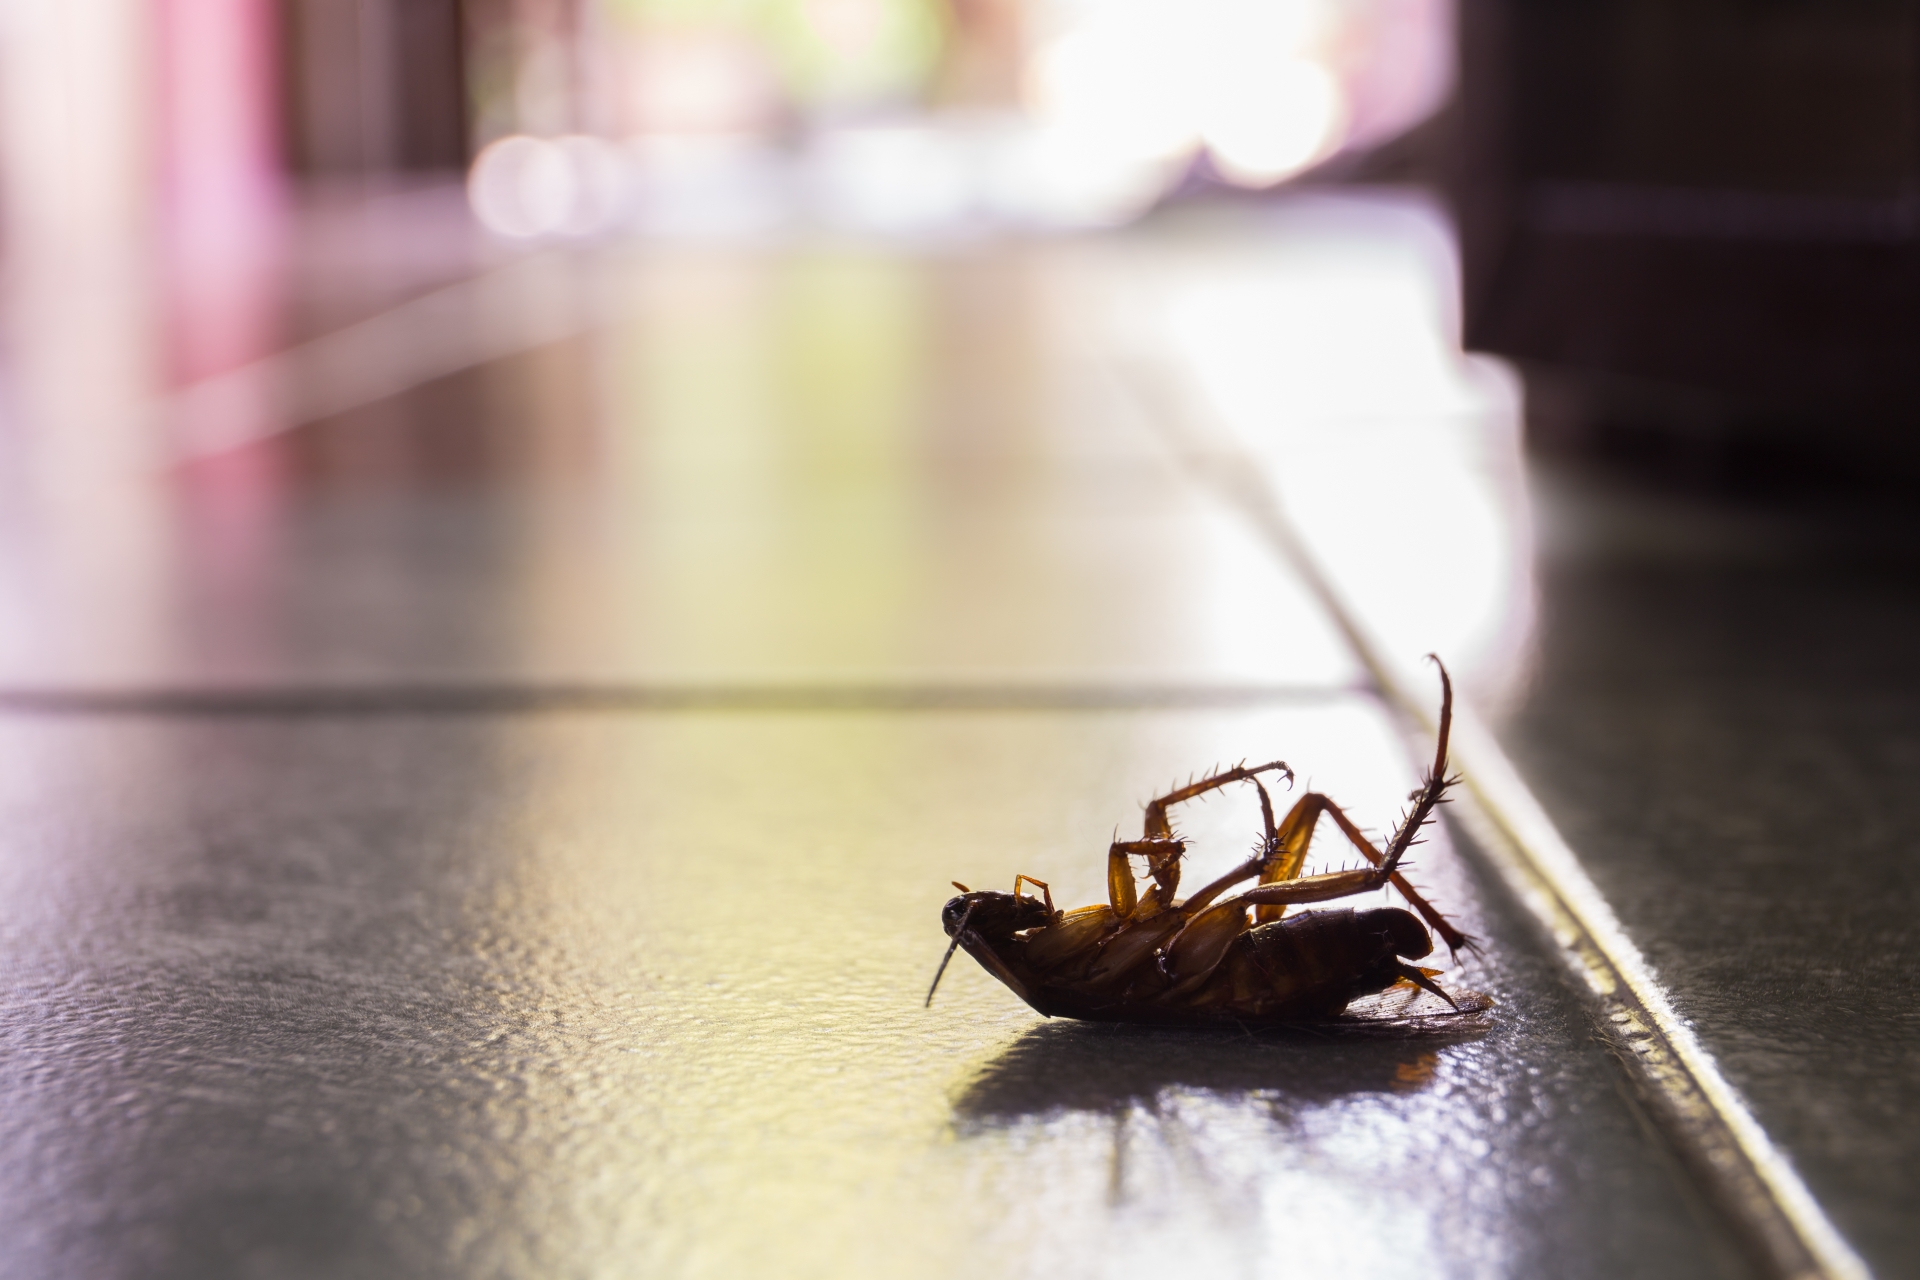 Cockroach Control, Pest Control in Norwood Green, UB2. Call Now 020 8166 9746